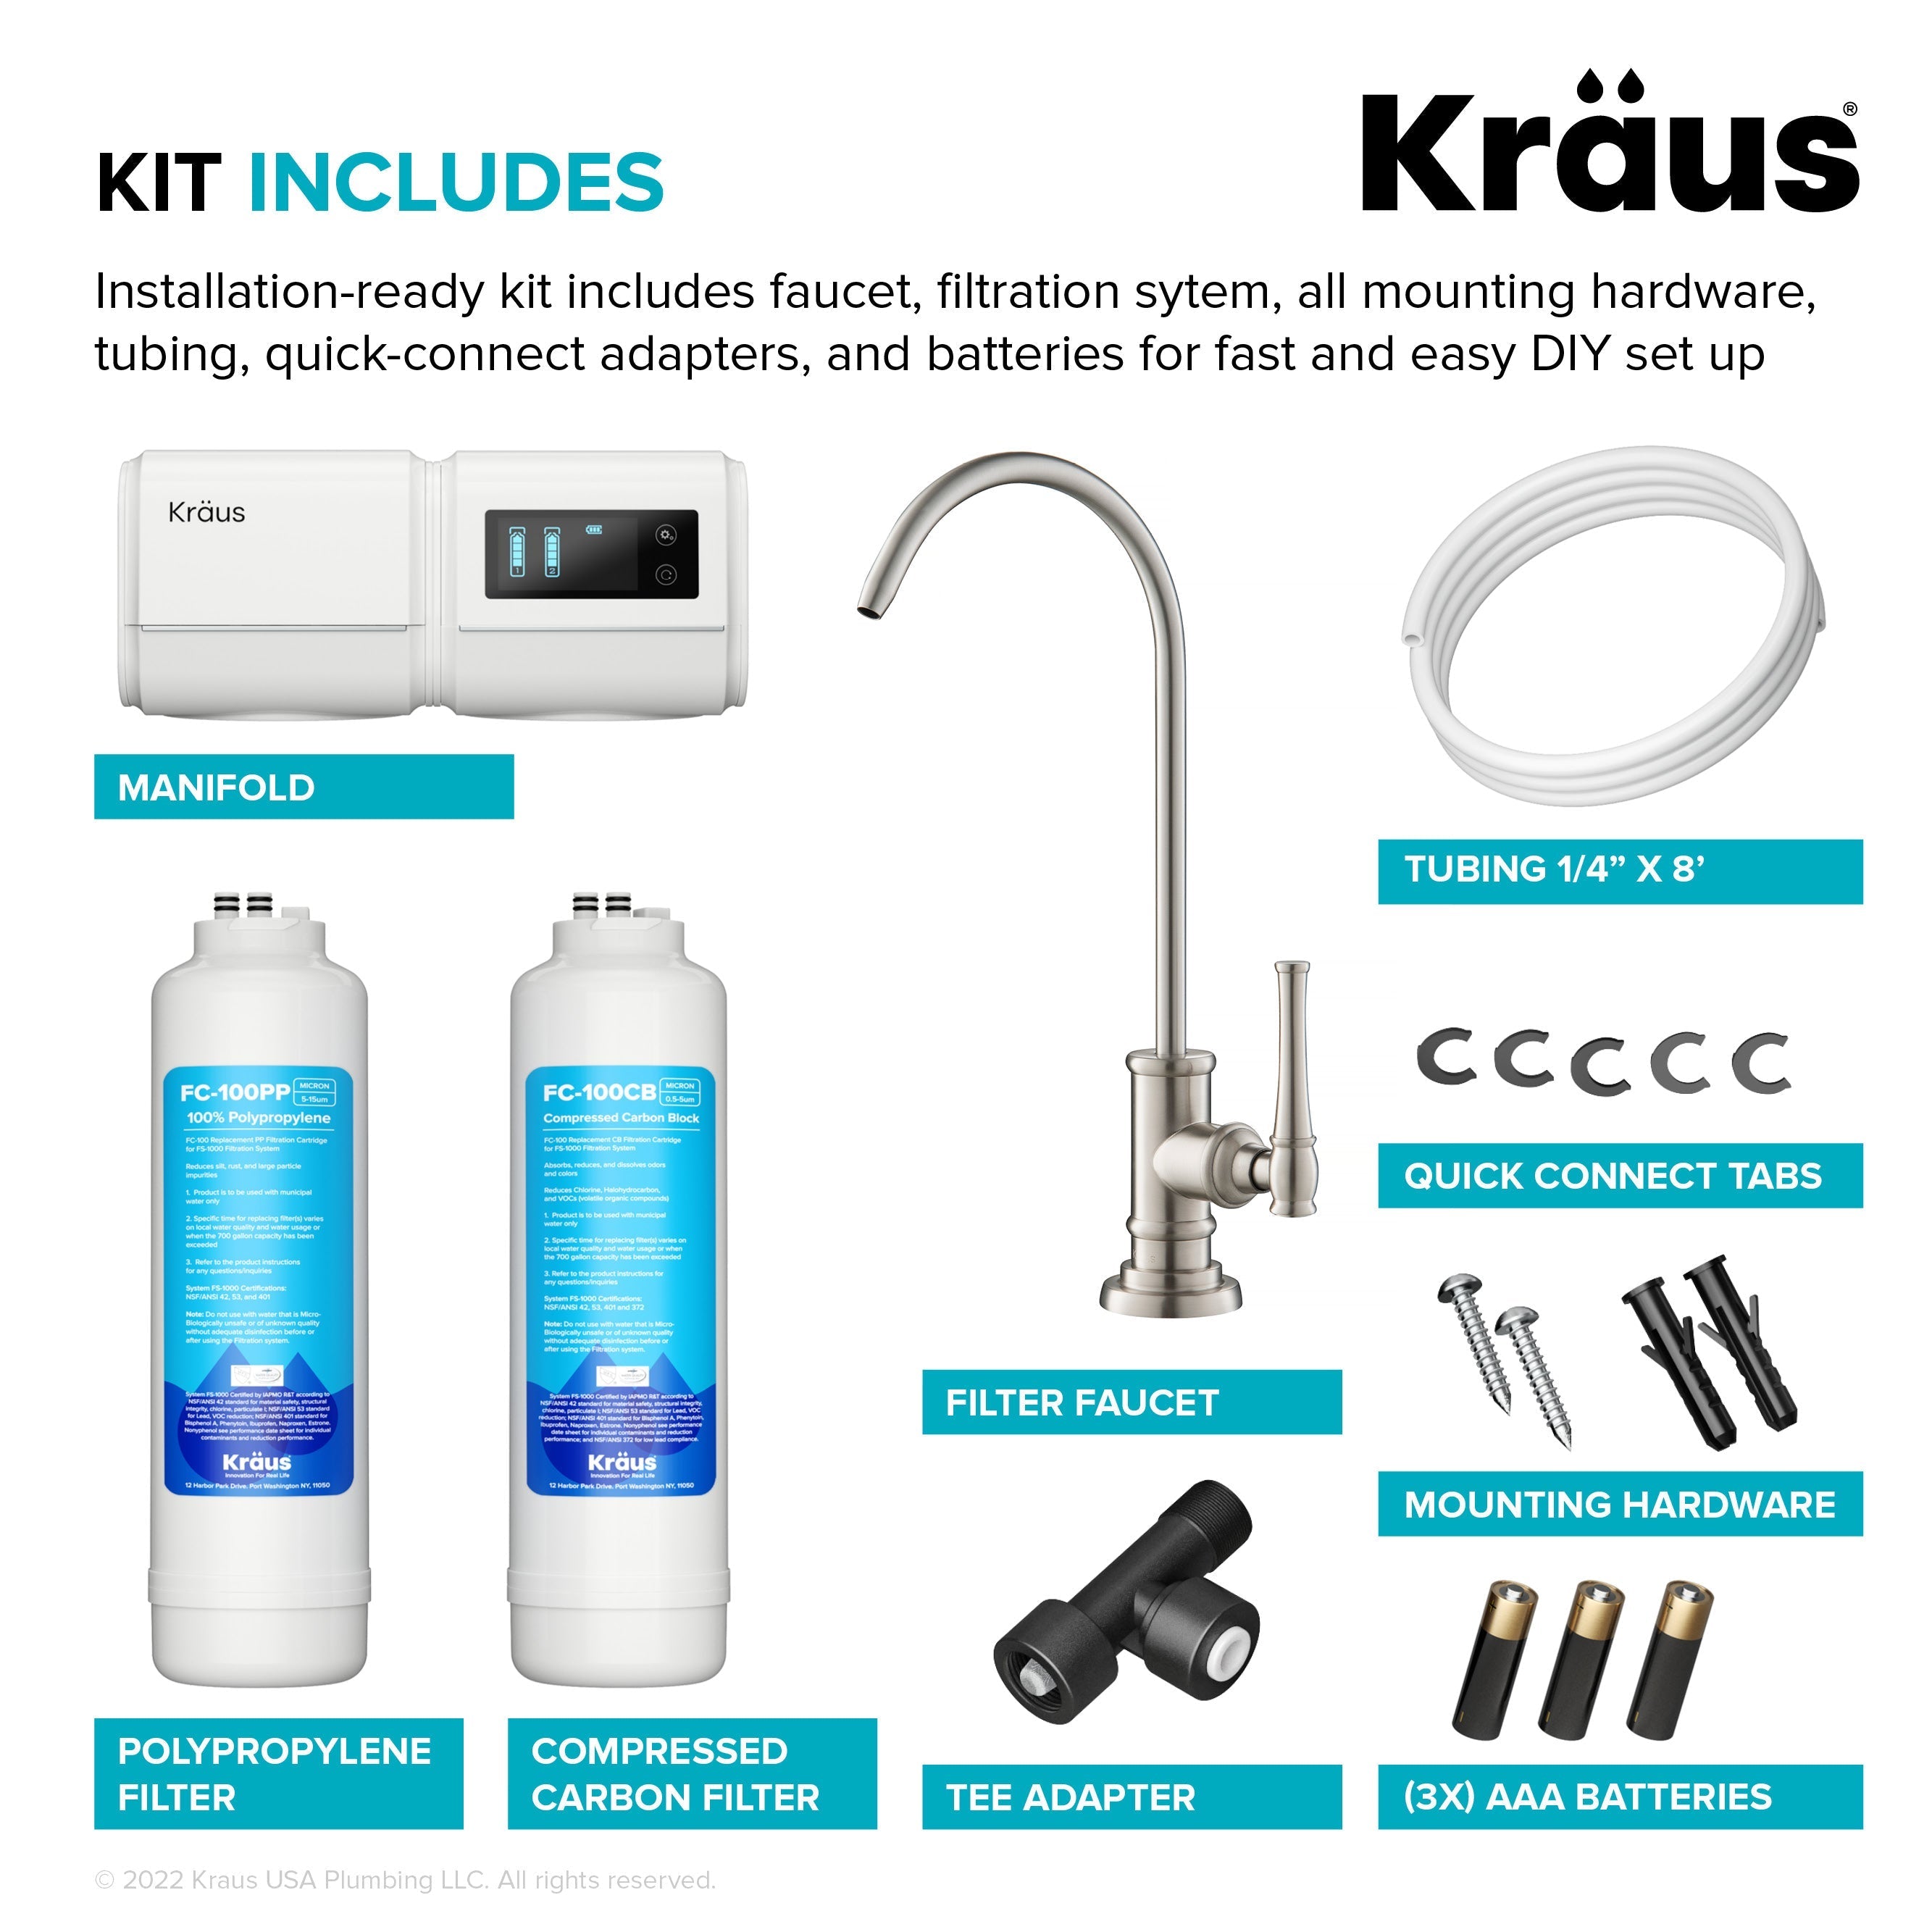 KRAUS Purita 2-Stage Under-Sink Filtration System with Allyn Single Handle Drinking Water Filter Faucet in Spot-Free Stainless Steel-FS-1000-FF-102SFS